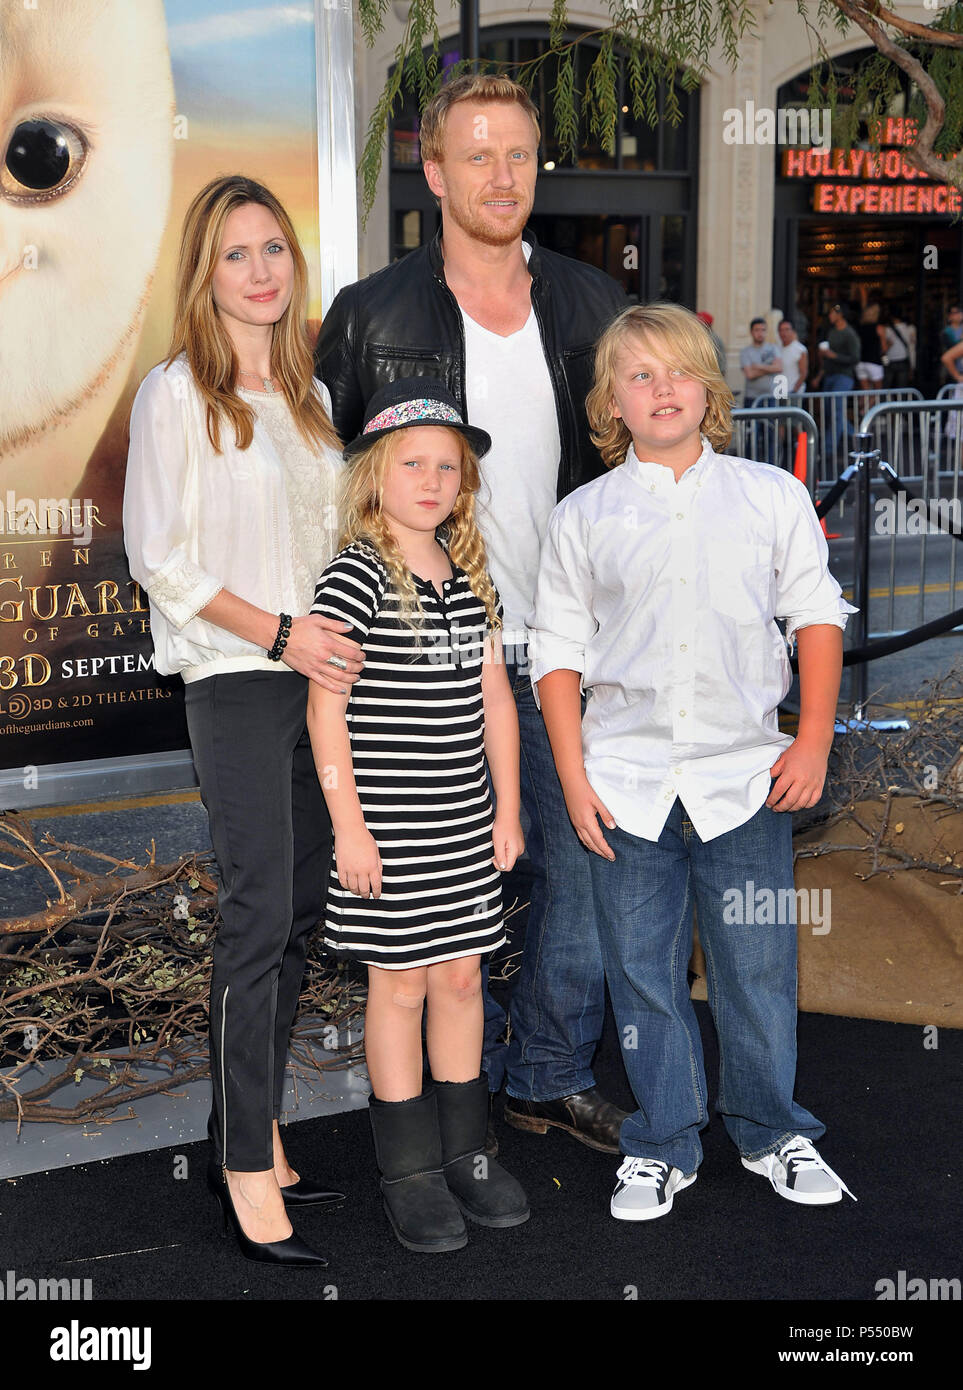 Kevin Mckidd, Wife Jane Parker,  Kids Iona , Joseph Legend Of The Guardians Premiere at the Chinese Theatre In Los Angeles.Kevin Mckidd, Wife Jane Parker,  Kids Iona , Joseph 44  Event in Hollywood Life - California, Red Carpet Event, USA, Film Industry, Celebrities, Photography, Bestof, Arts Culture and Entertainment, Celebrities fashion, Best of, Hollywood Life, Event in Hollywood Life - California, Red Carpet and backstage, Music celebrities, Topix, Couple, family ( husband and wife ) and kids- Children, brothers and sisters inquiry tsuni@Gamma-USA.com, Credit Tsuni / USA, 2010 Stock Photo